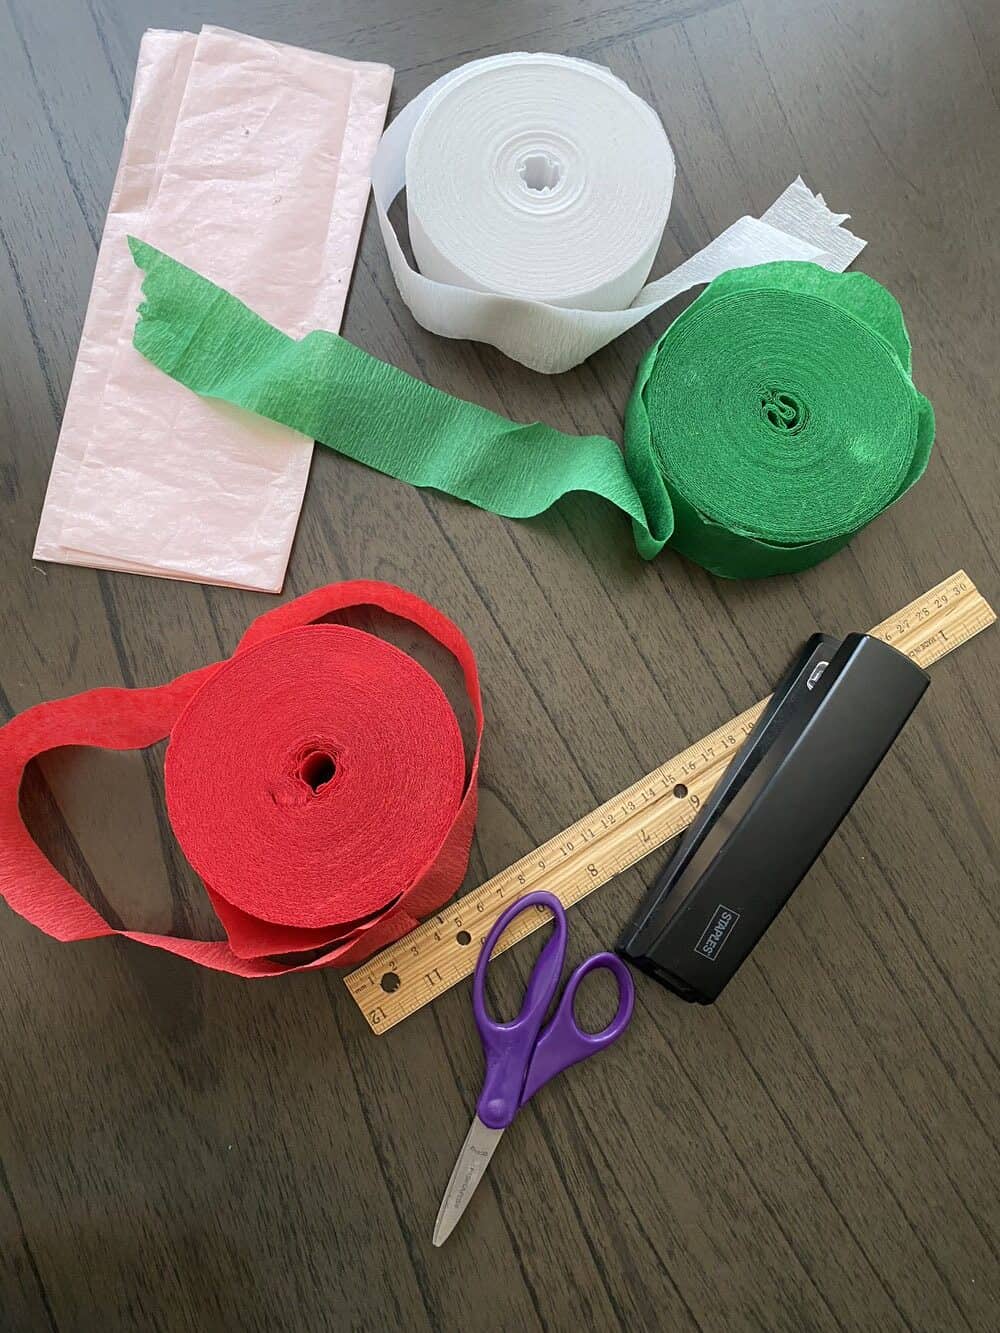 what do you need to make a paper chain